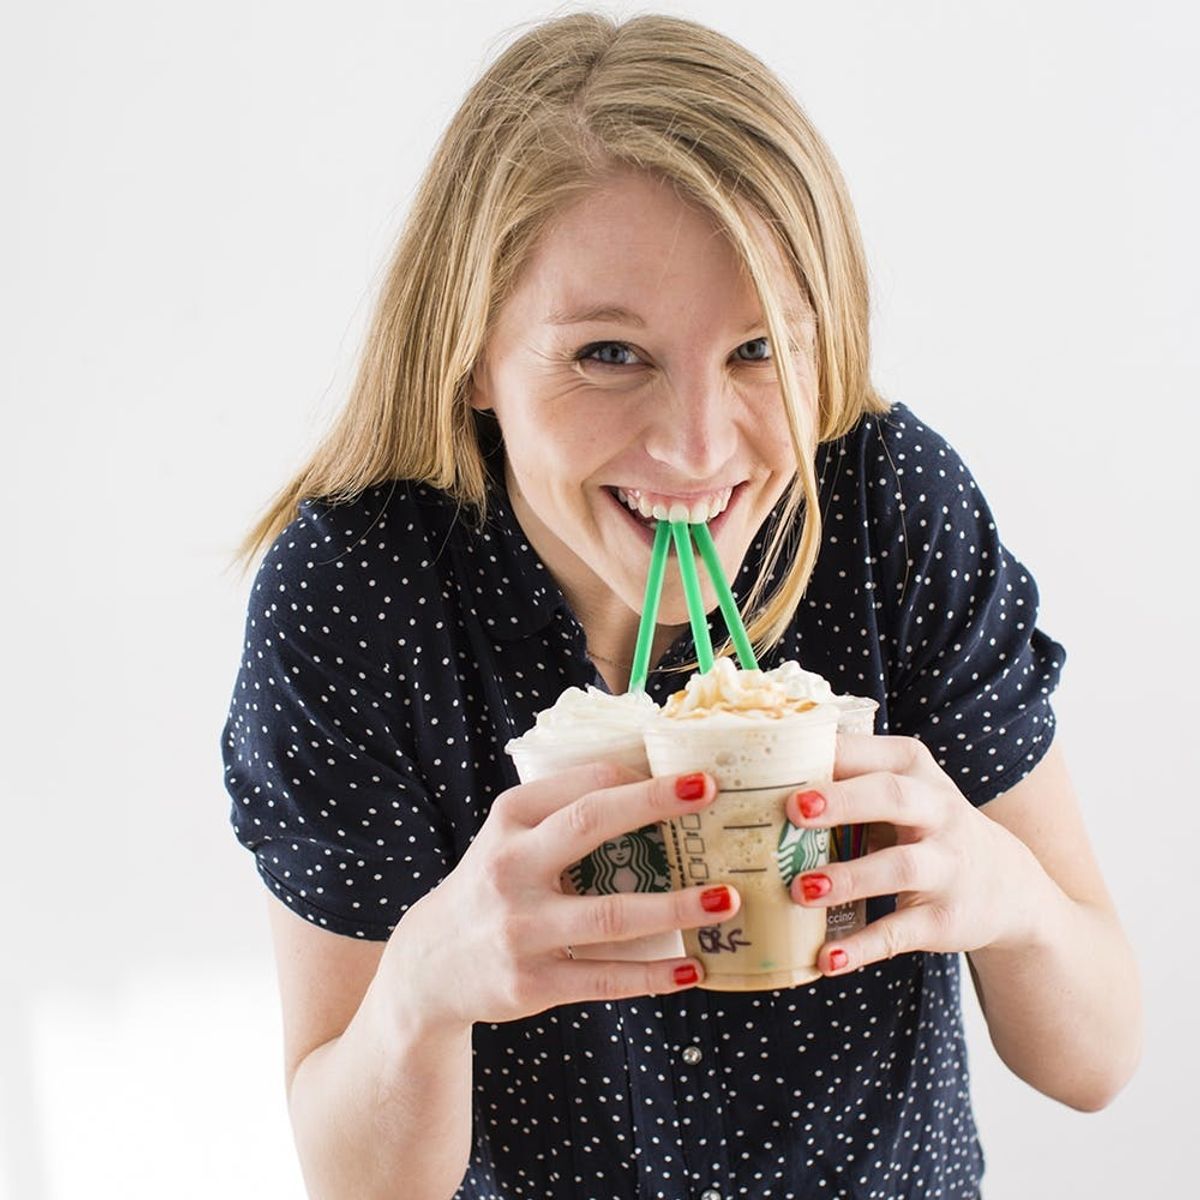 What Your Favorite Frappuccino Flavor Says About You